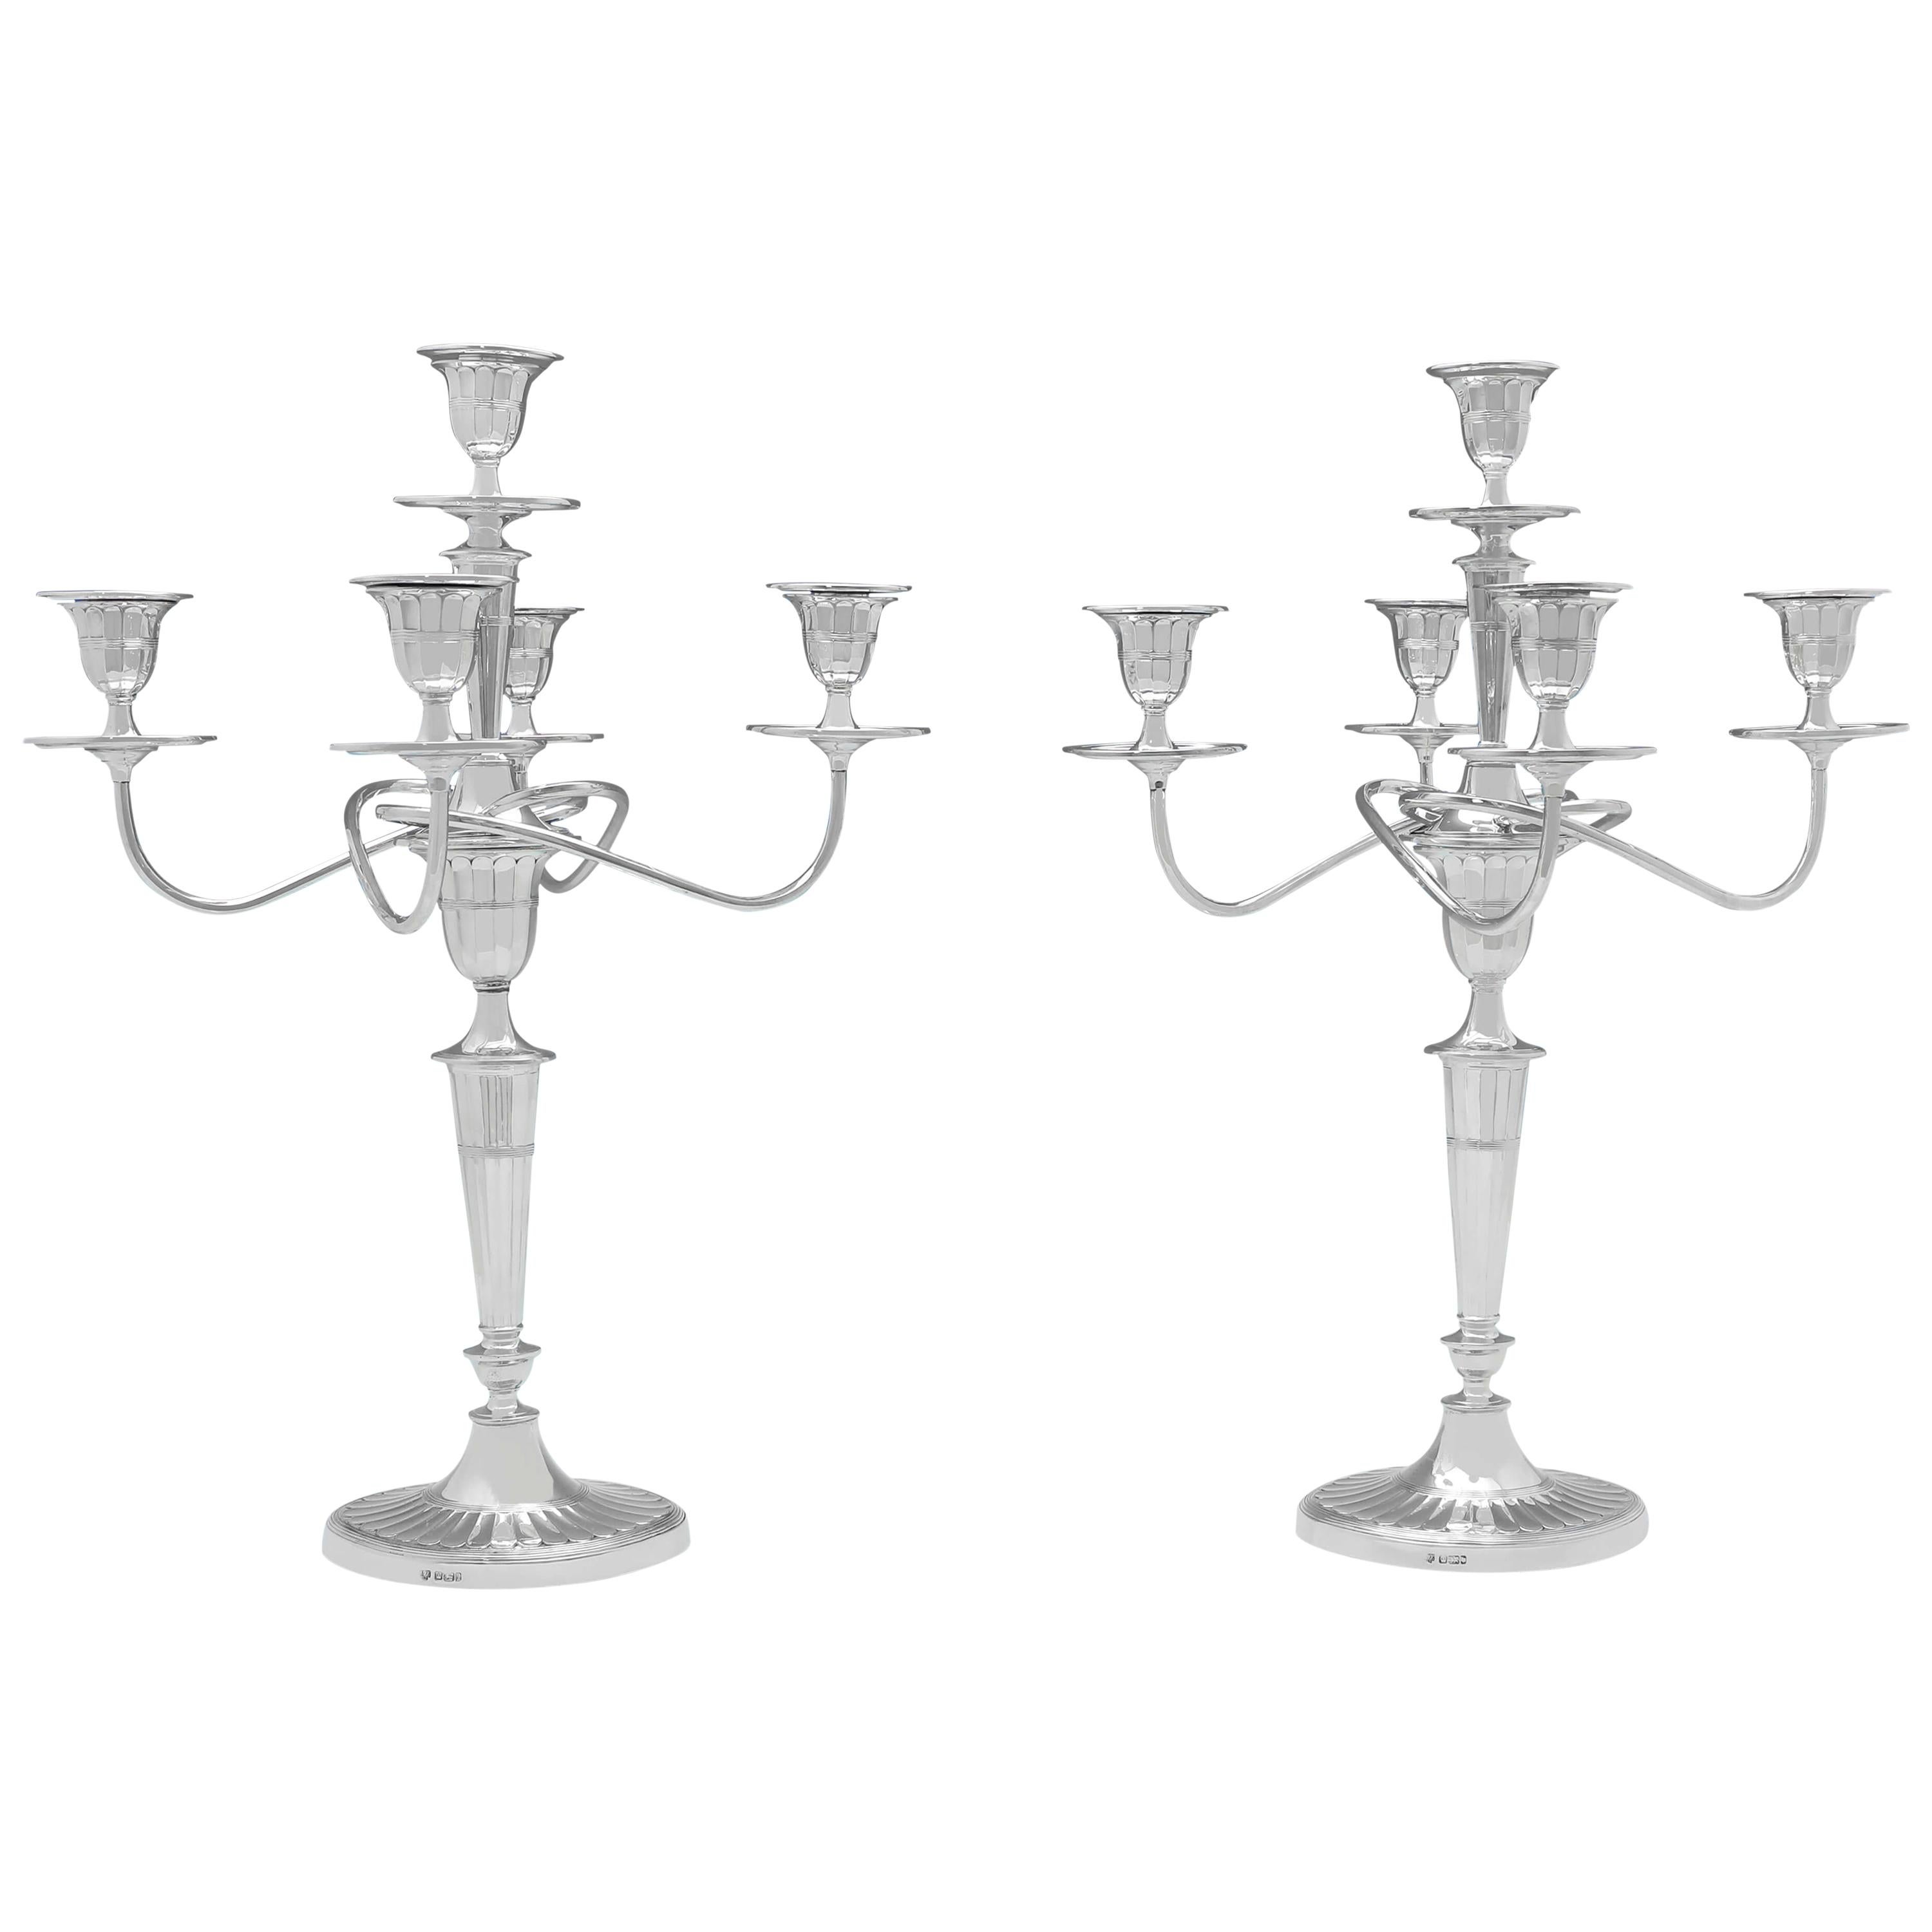 Pair of 5-Light Antique Sterling Silver Candelabra in Batwing Style Made in 1901